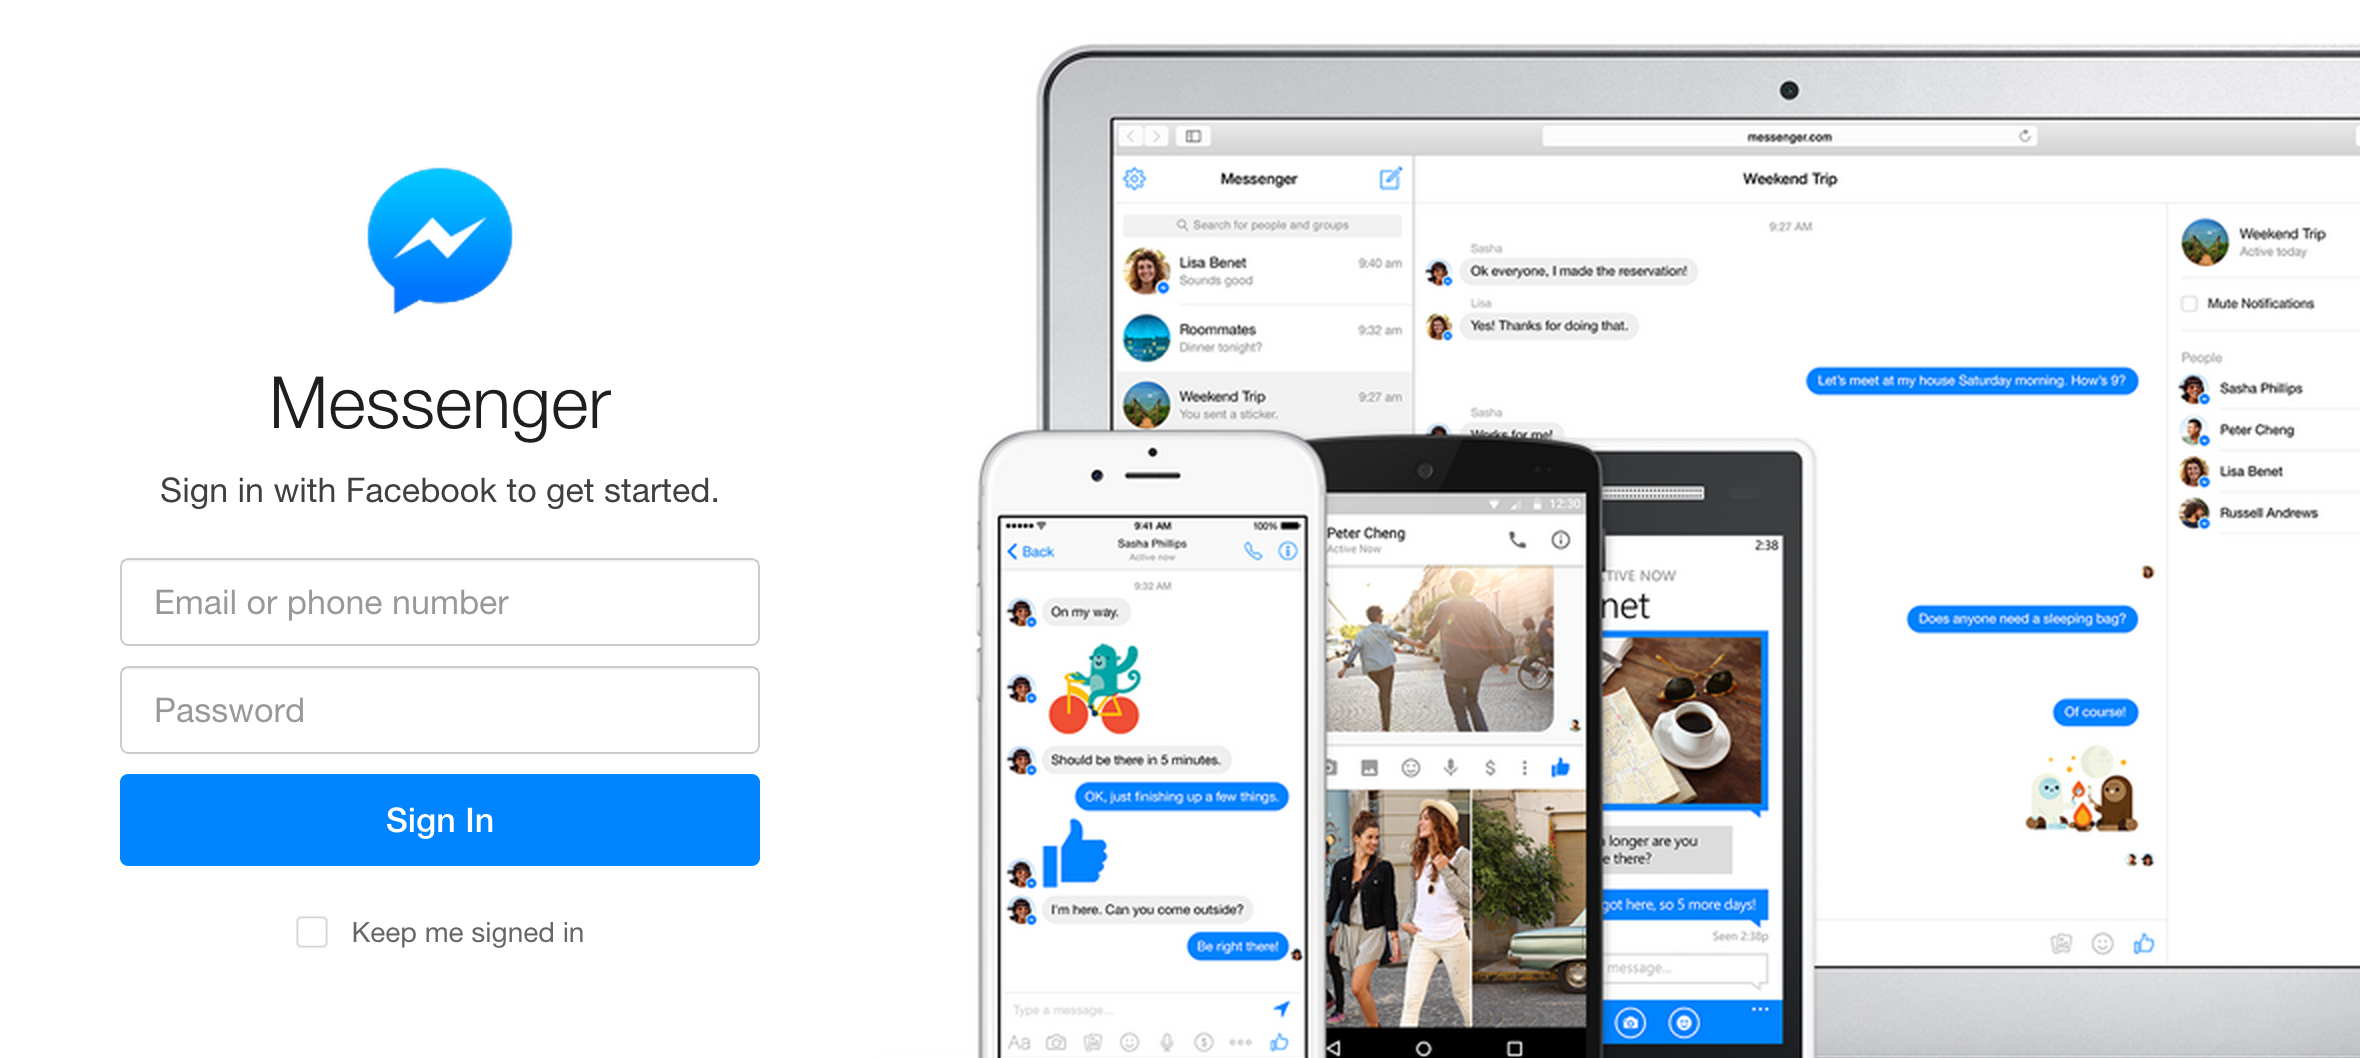 This App Brings Facebook Messenger To Your Mac S Desktop One A Digital Media Archive By Minterest